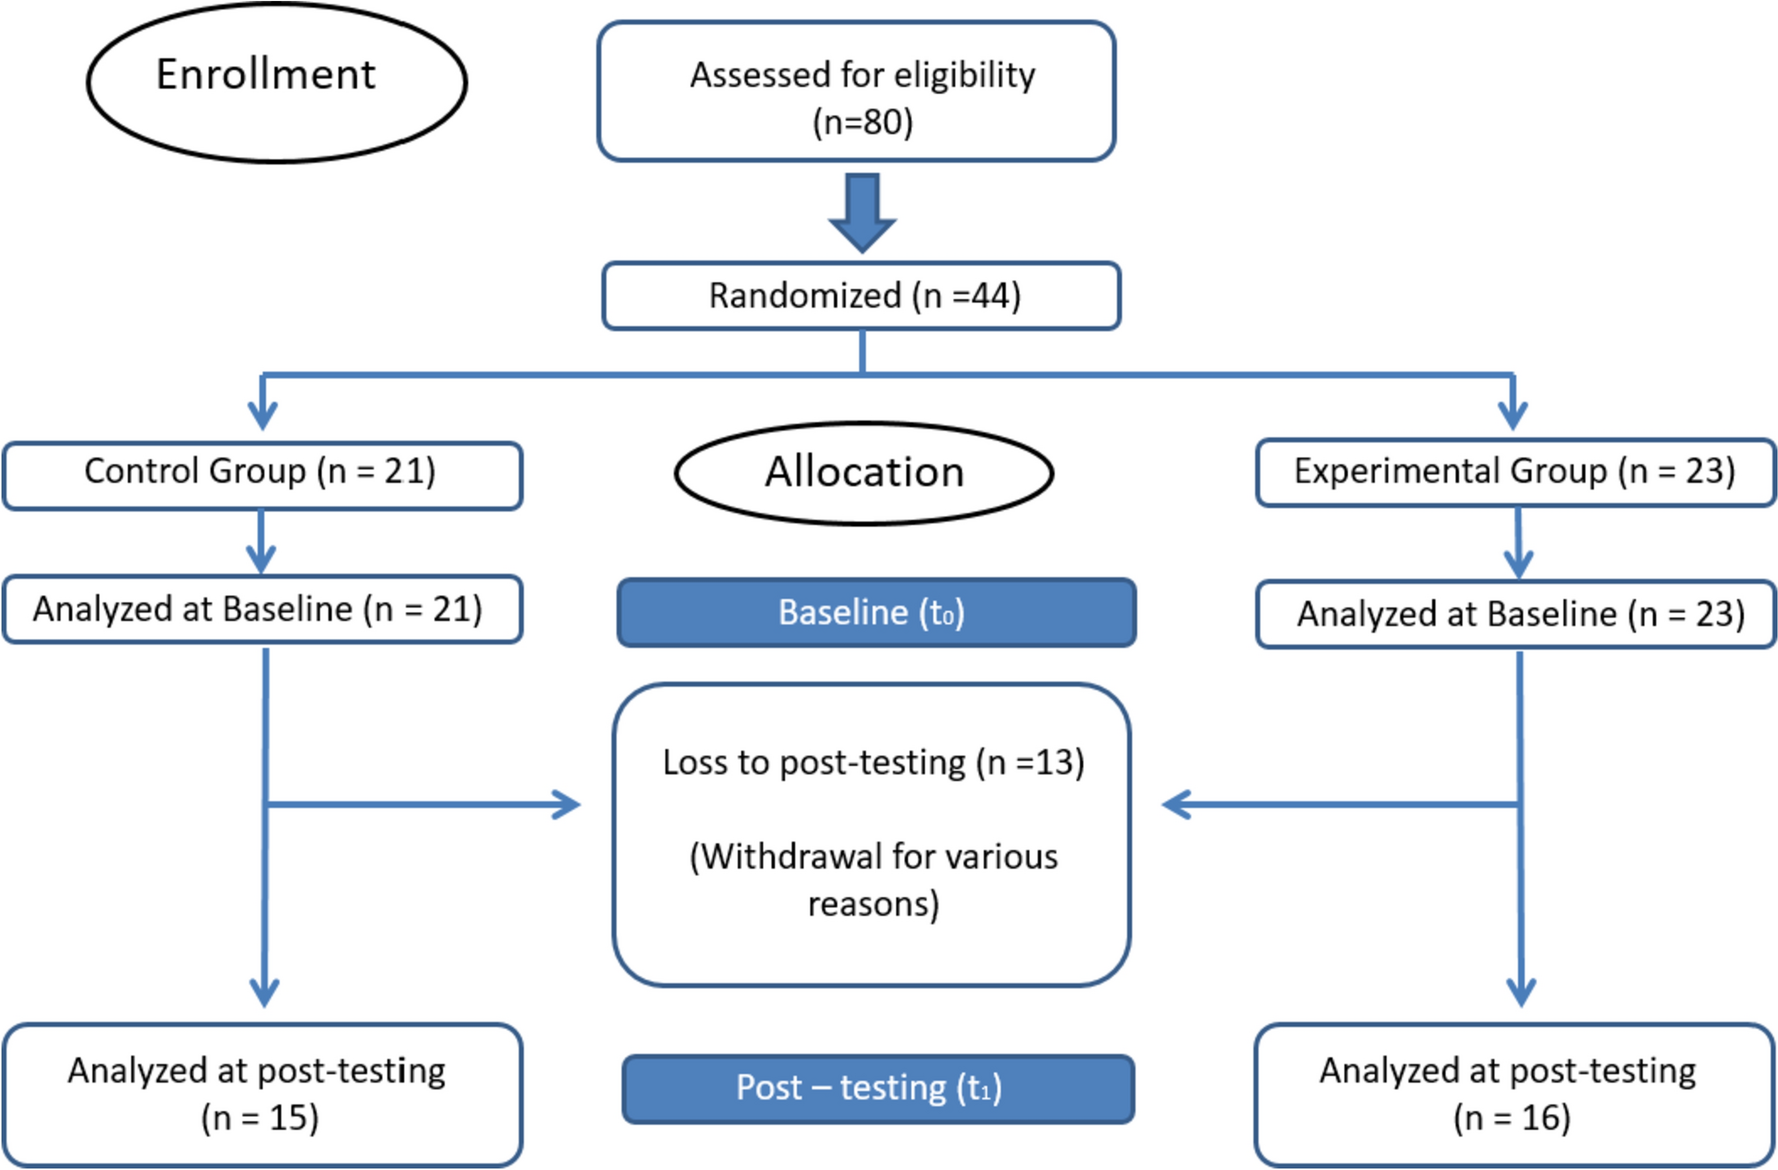 The impact of aerobic endurance training on cognitive performance in schizophrenic inpatients in a clinical routine setting